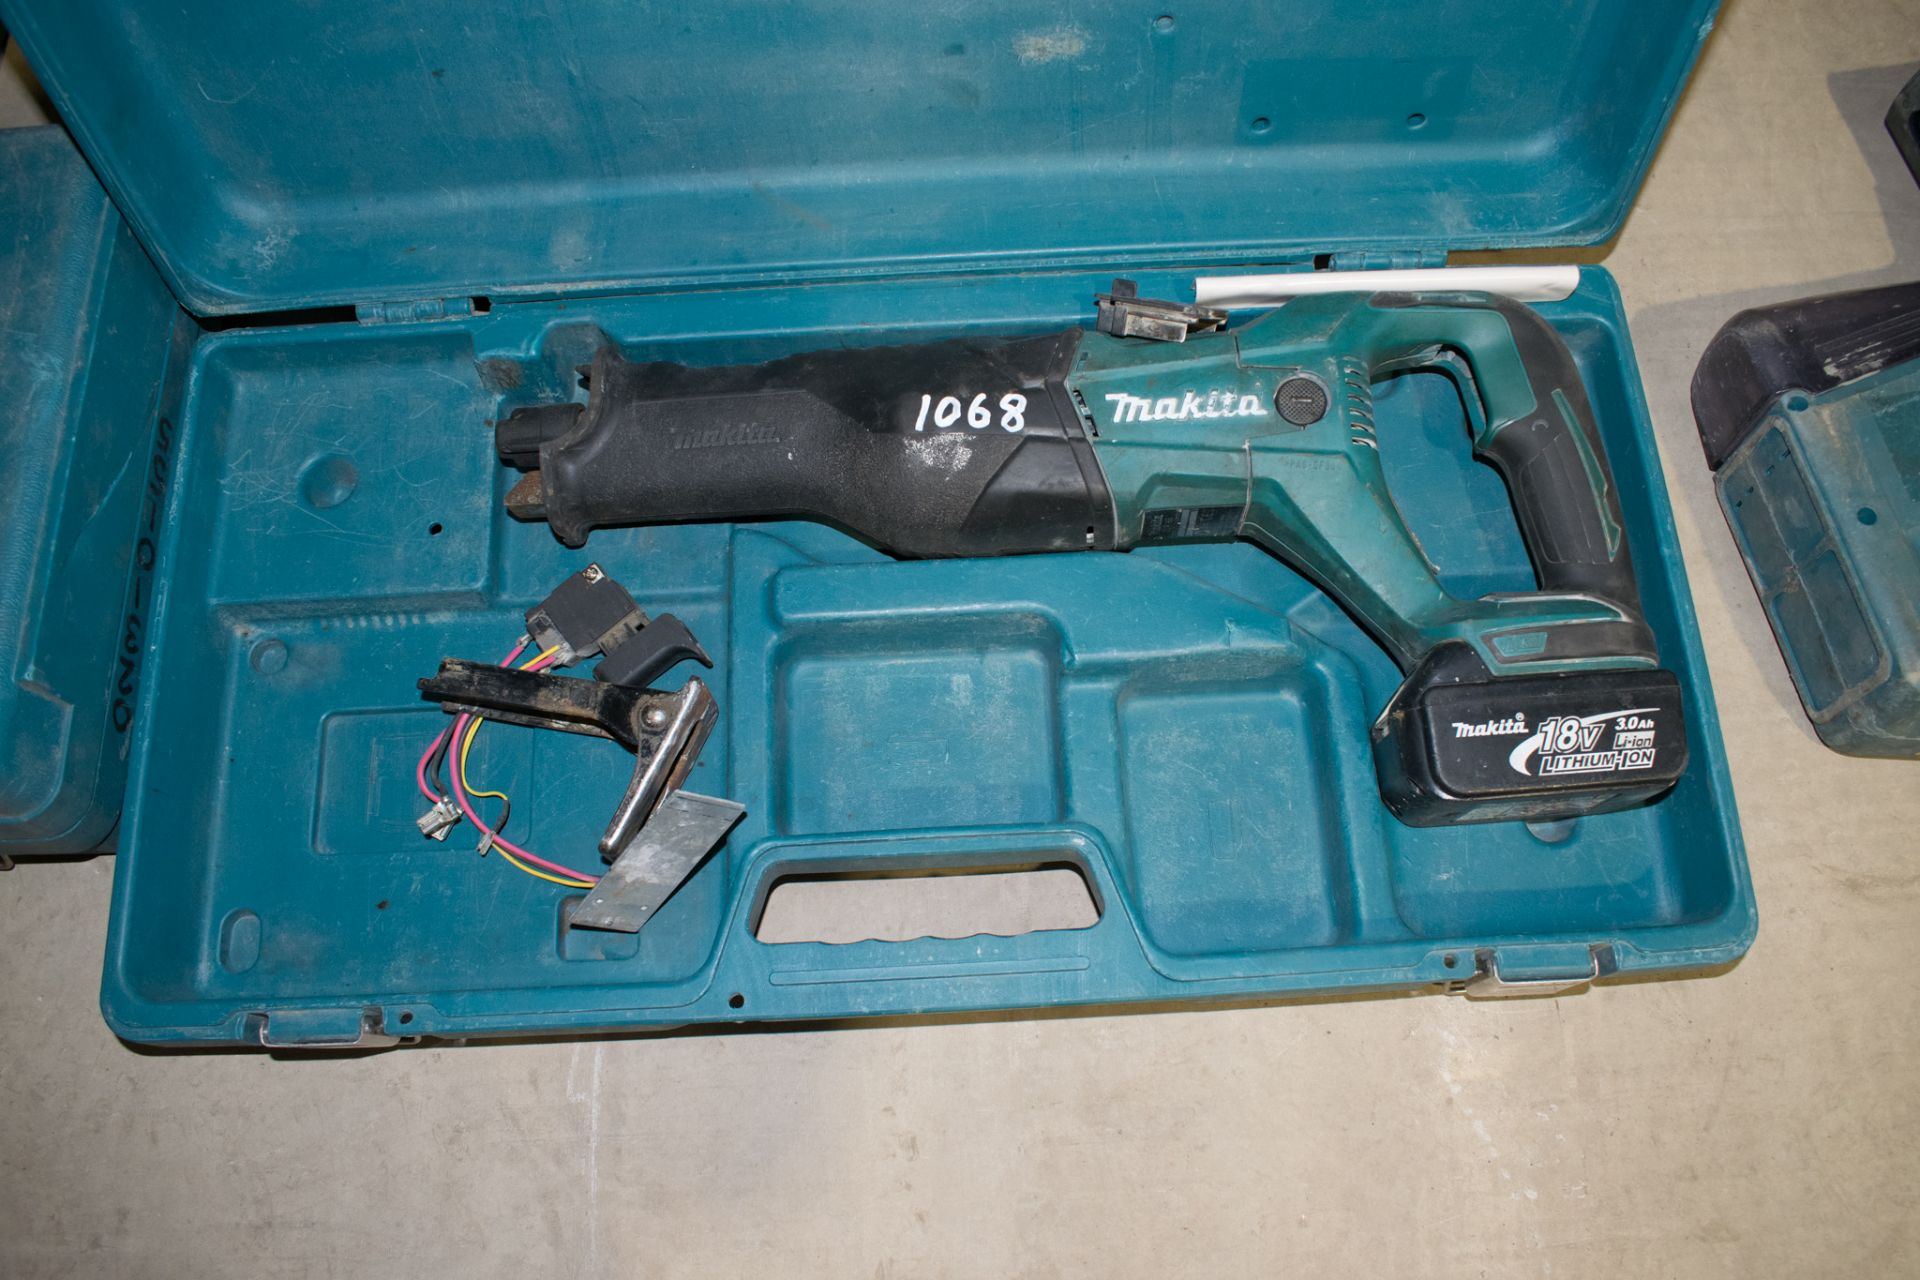 Makita 18v cordless SDS rotary hammer drill c/w battery, charger & carry case ** Parts